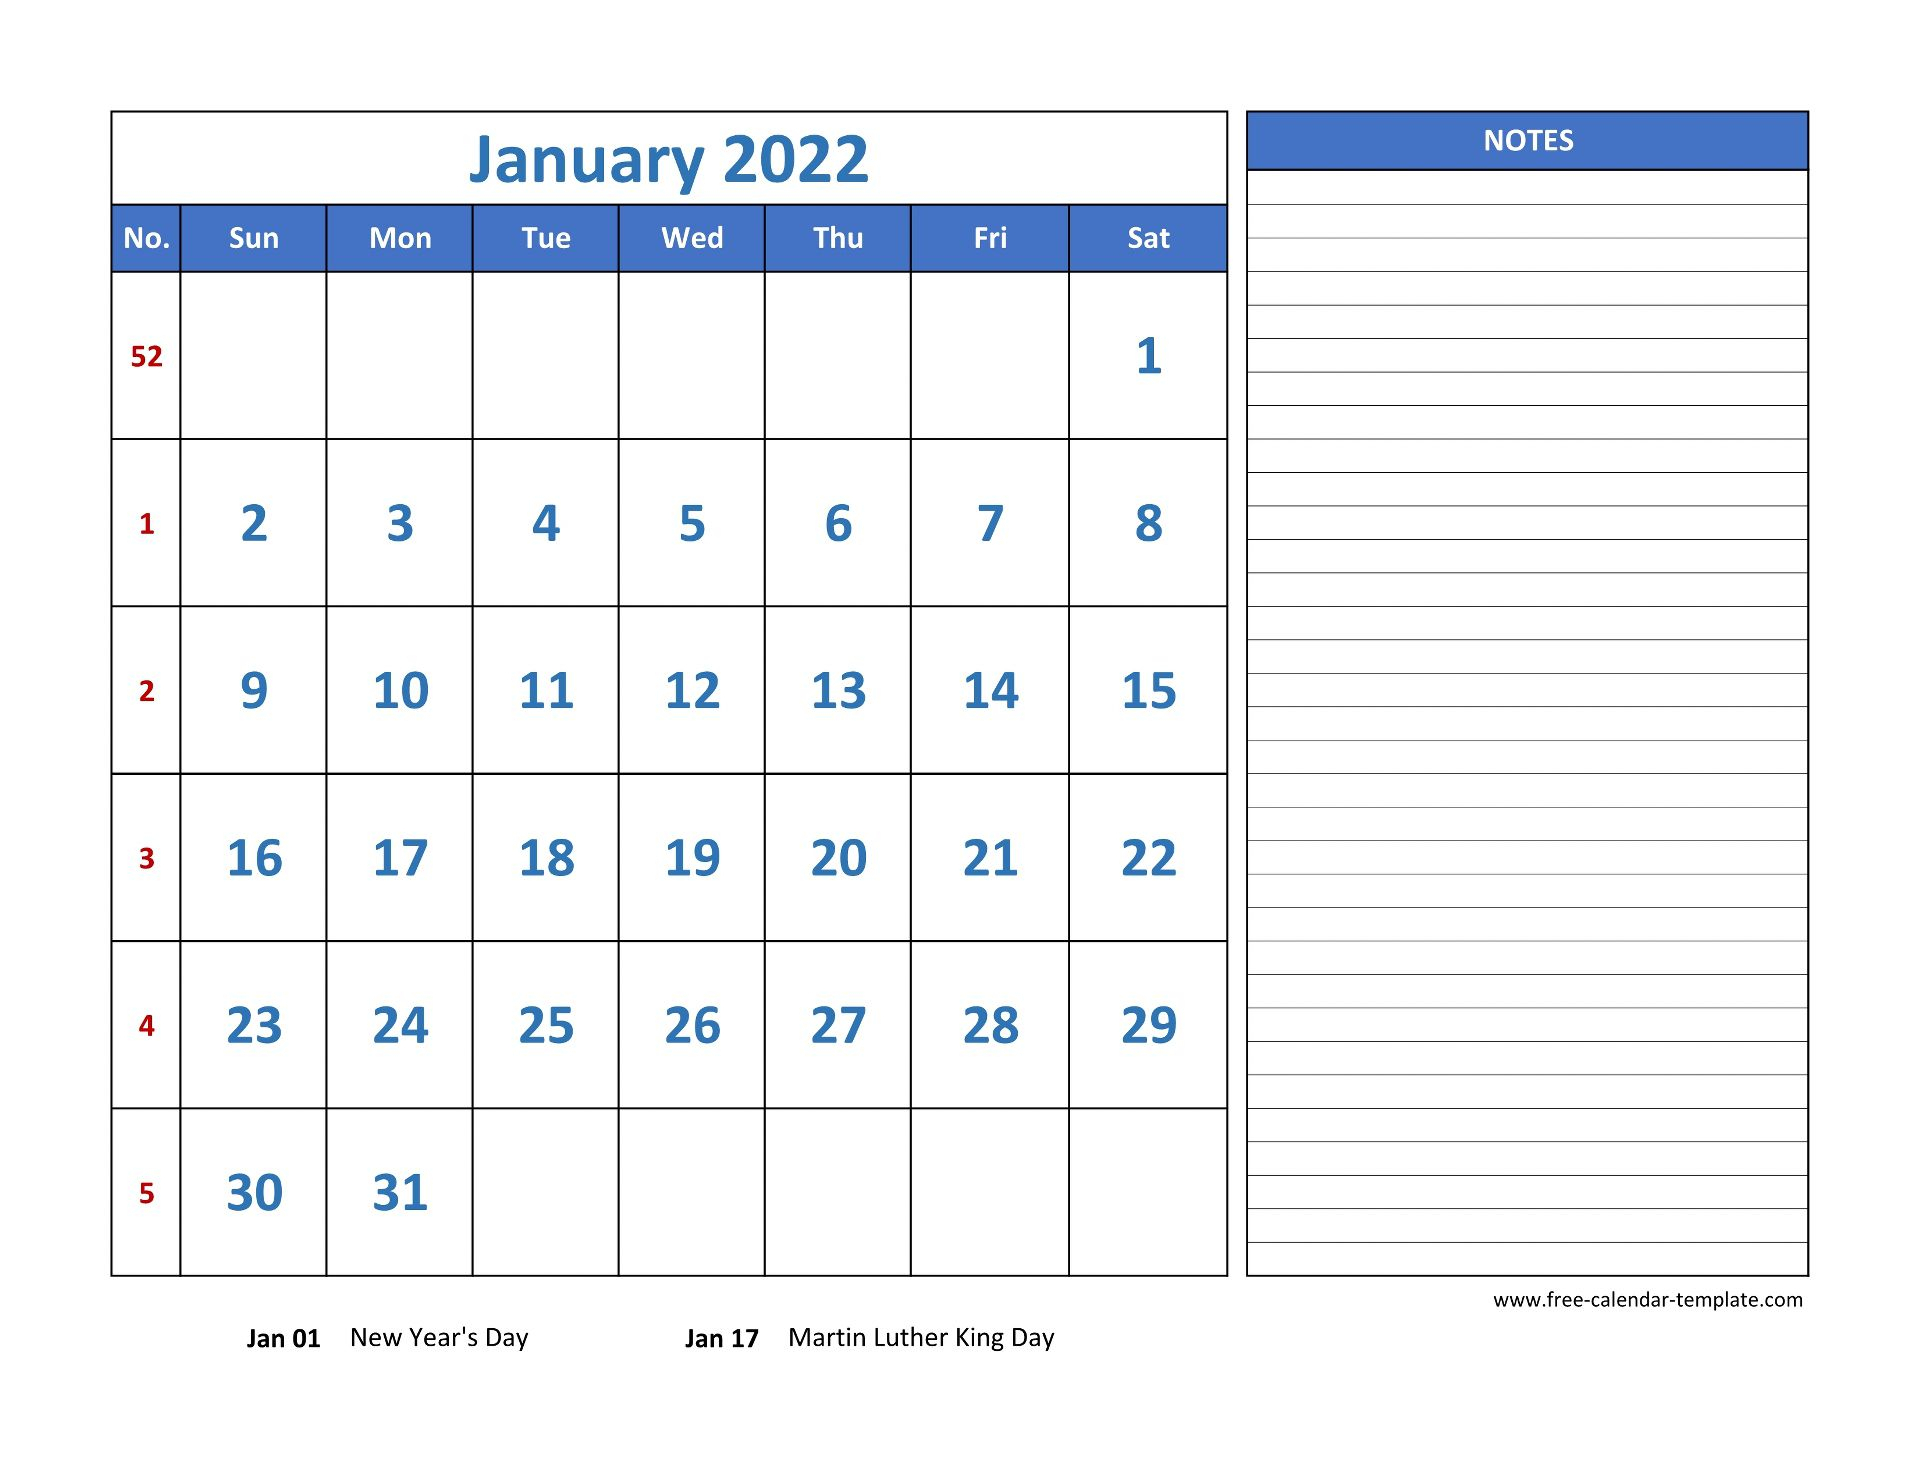 January Calendar 2022 Grid Lines For Holidays And Notes (Horizontal within Free 2022 Monthly Calendars That Are Printable